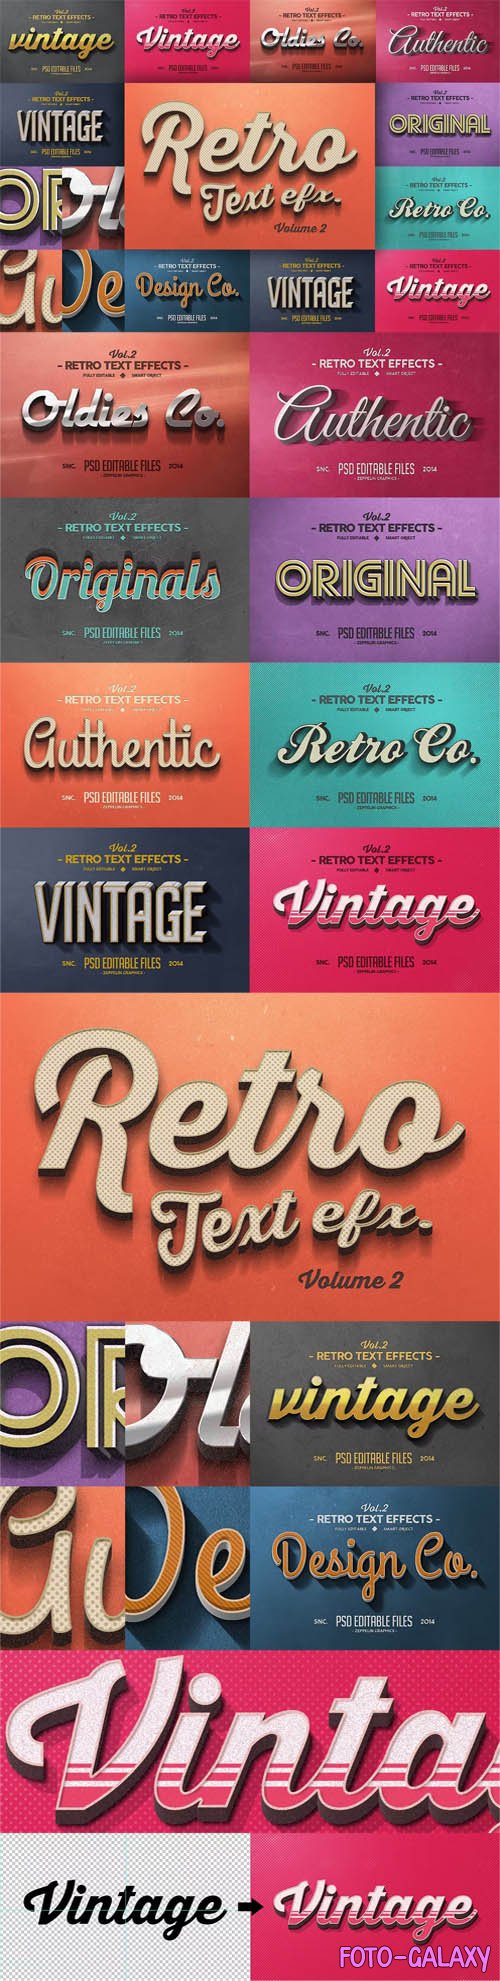 Vintage Text Effects [Vol.2] for Photoshop